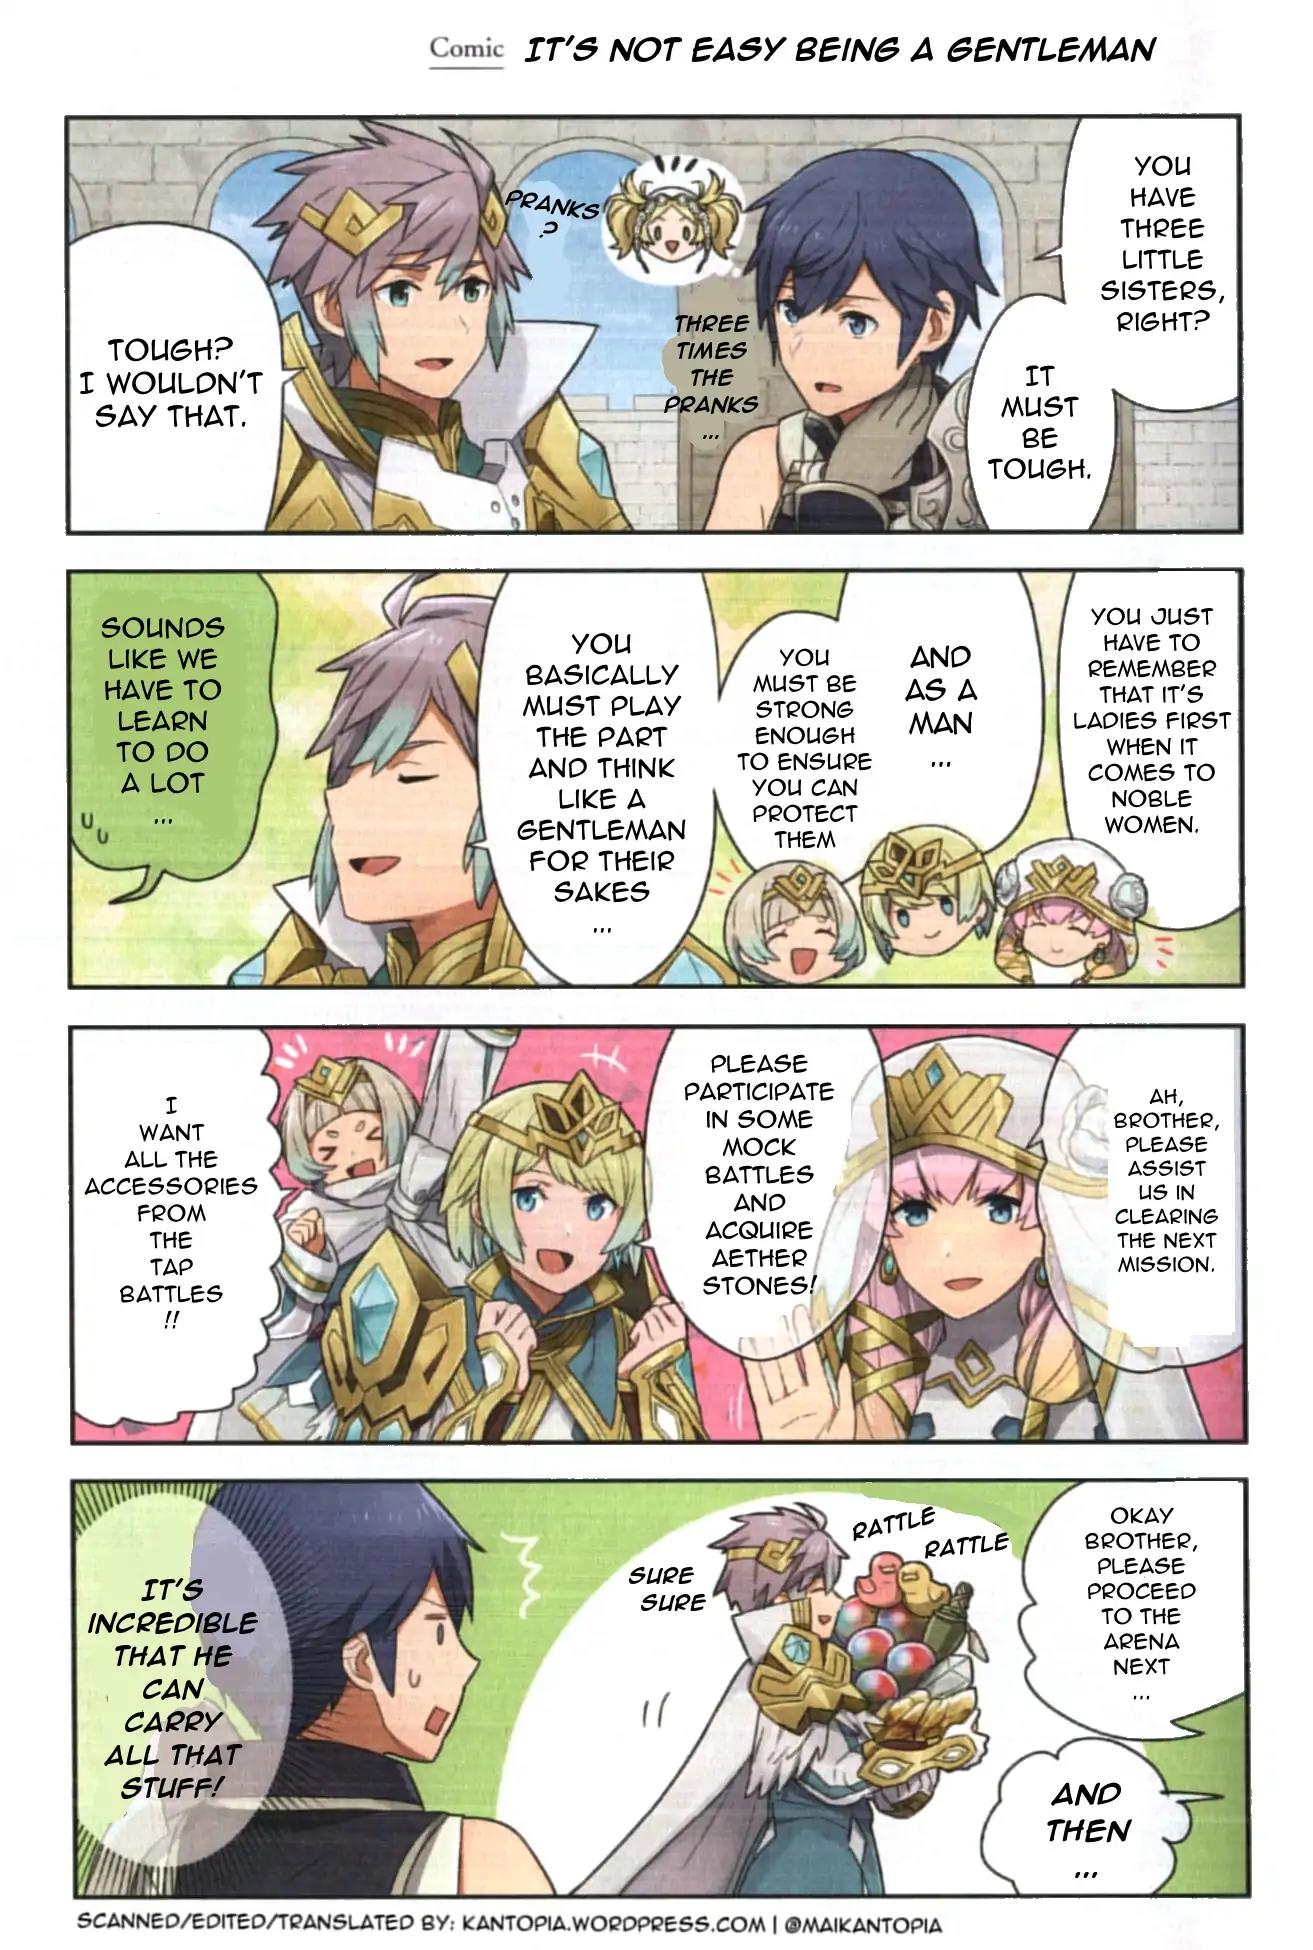 Fire Emblem Heroes Daily Lives of the Heroes Vol.1 Chapter 0.11: Character comic: